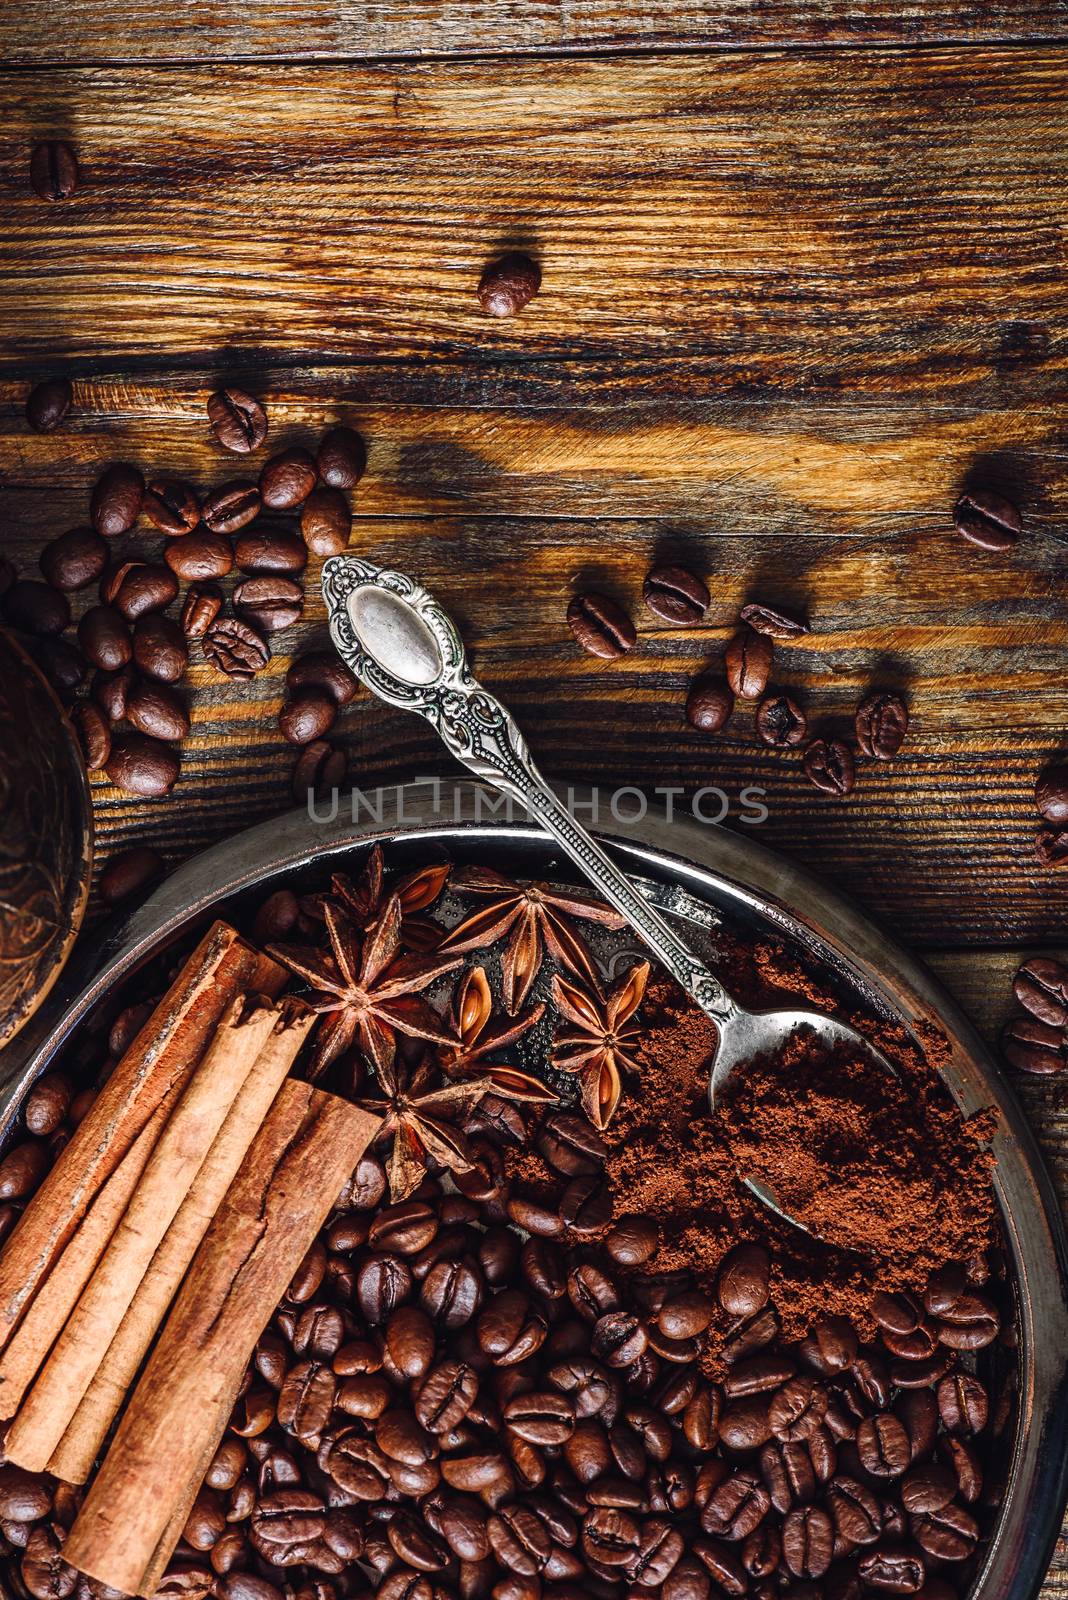 Coffee Beans with Spooonful of Ground Coffee, Cinnamon Sticks and Star Anise on Plate. Some Beans Scattered on Wooden Table. View from Above. Vertical Orientation.